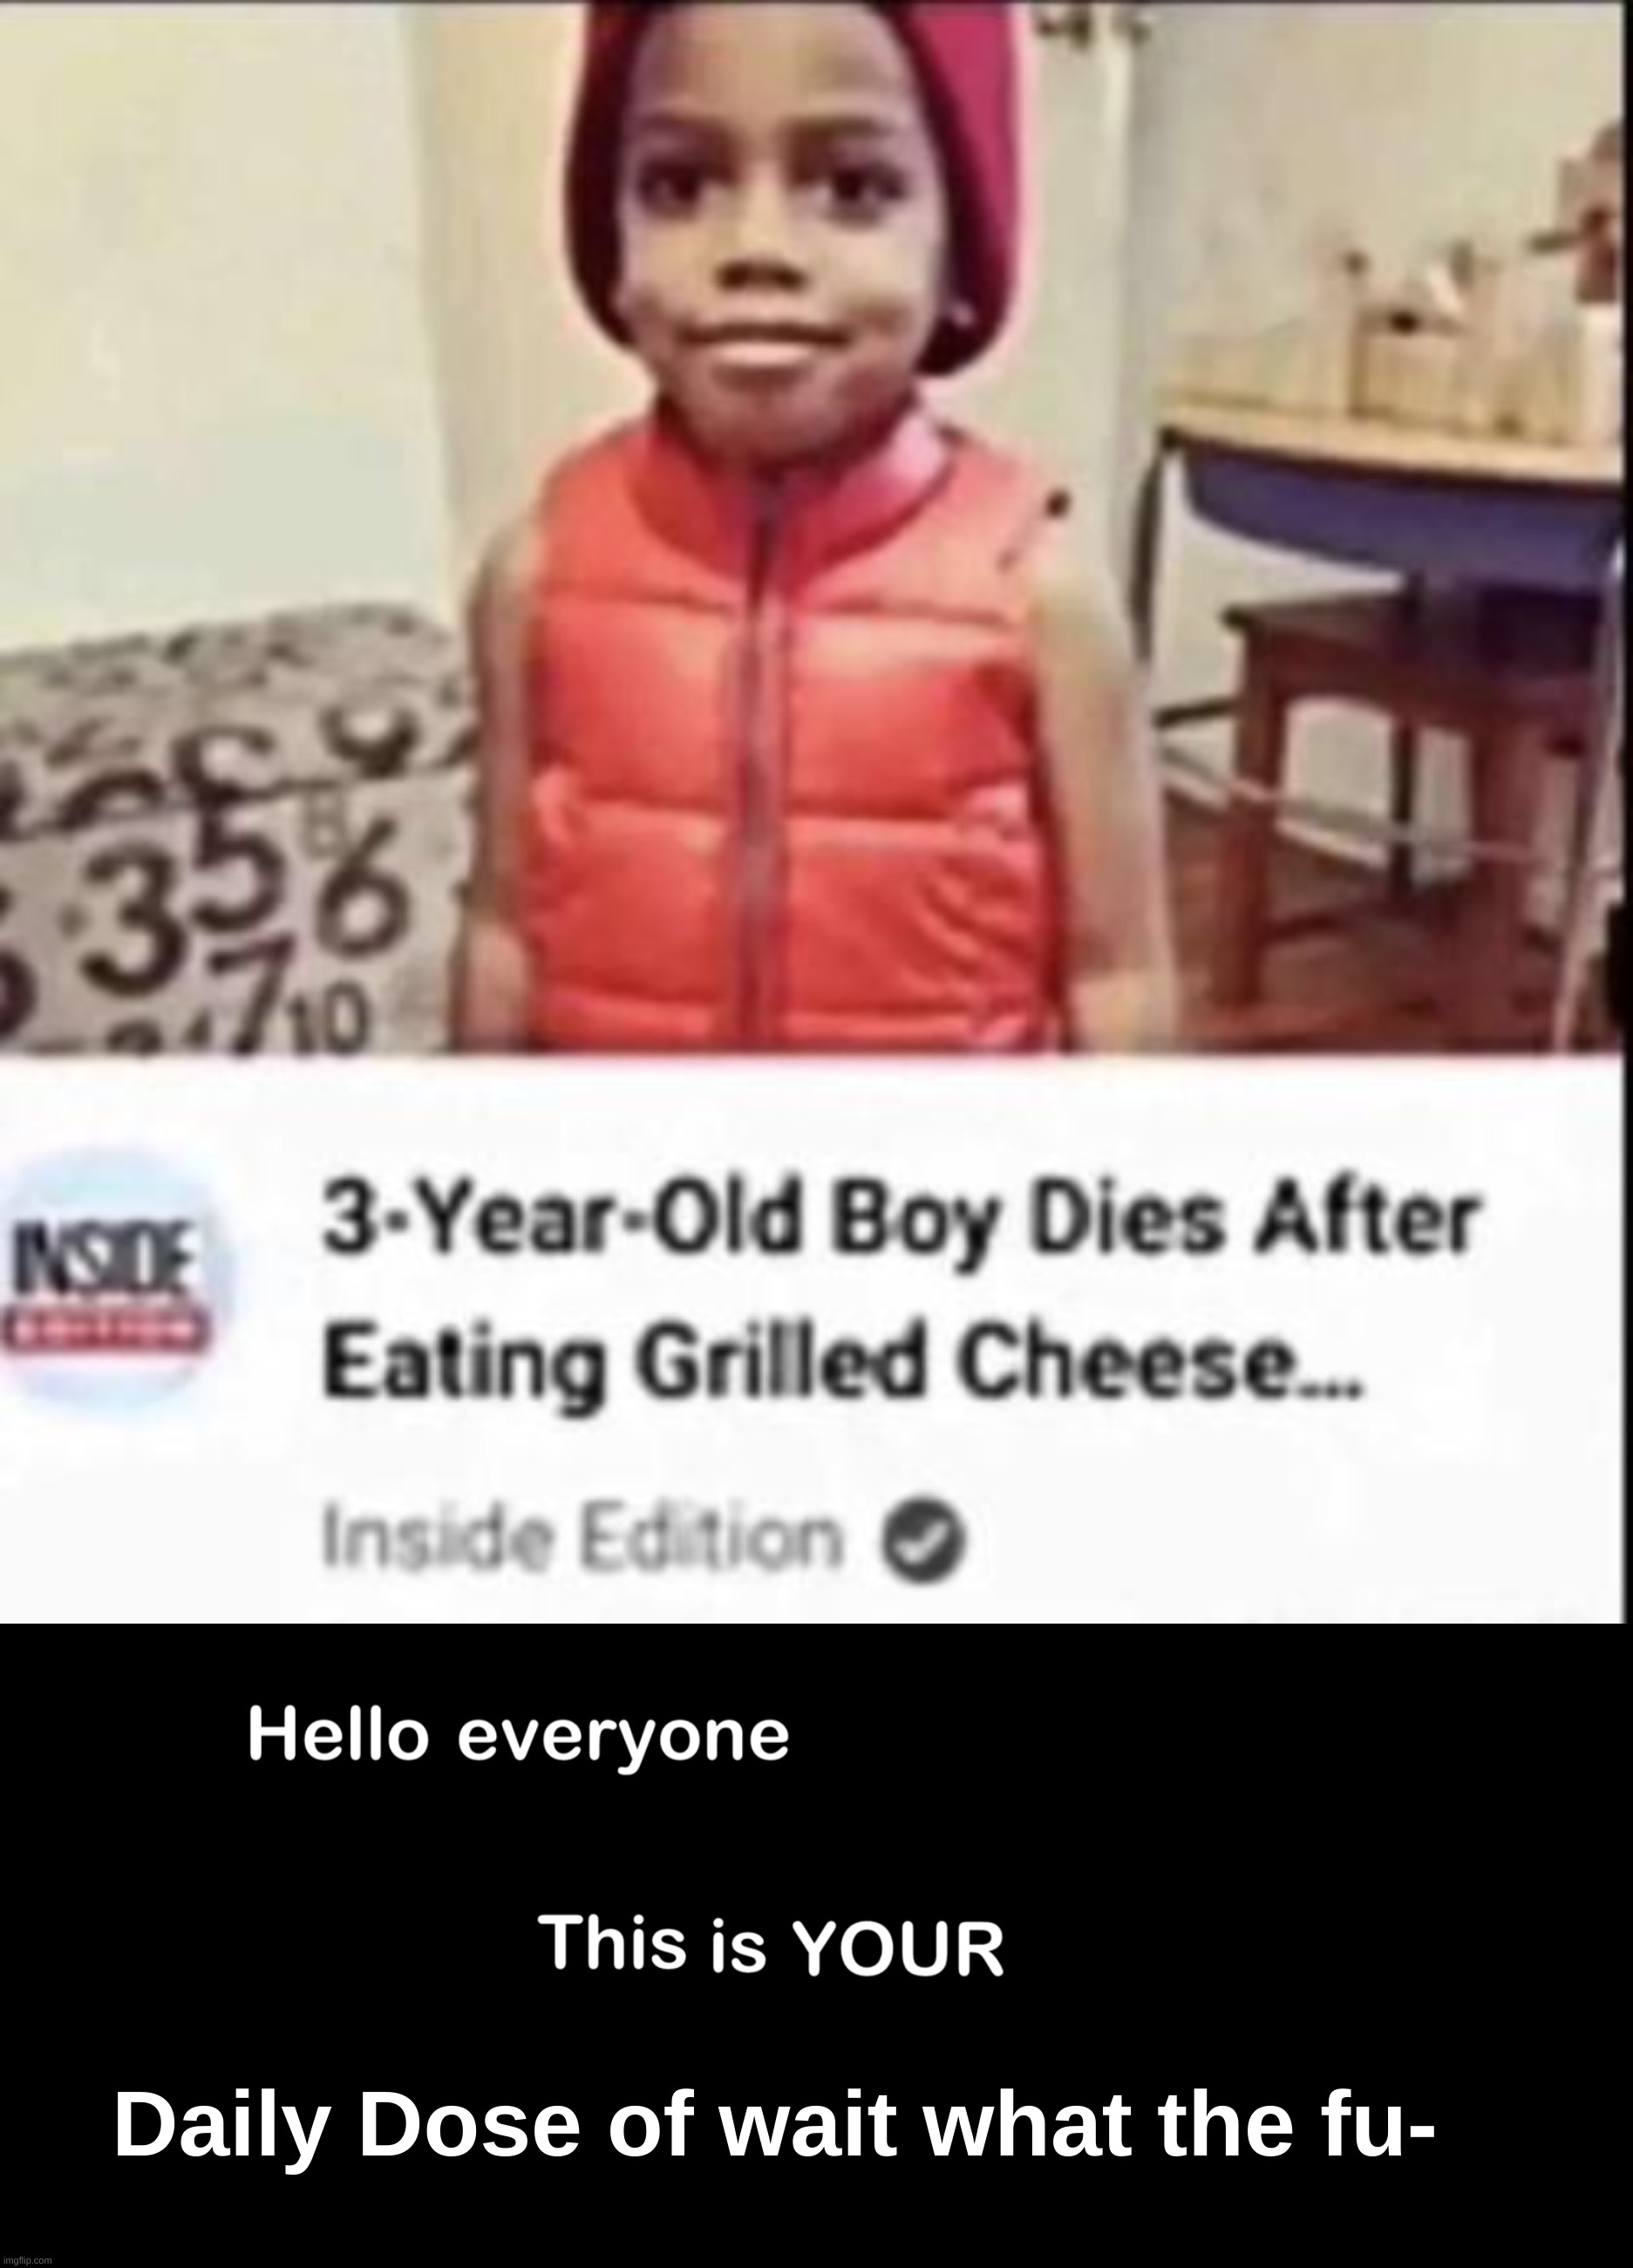 HOW?!?! | Daily Dose of wait what the fu- | image tagged in memes,wtf,grilled cheese,hello everyone this is your daily dose of,stupid,front page plz | made w/ Imgflip meme maker